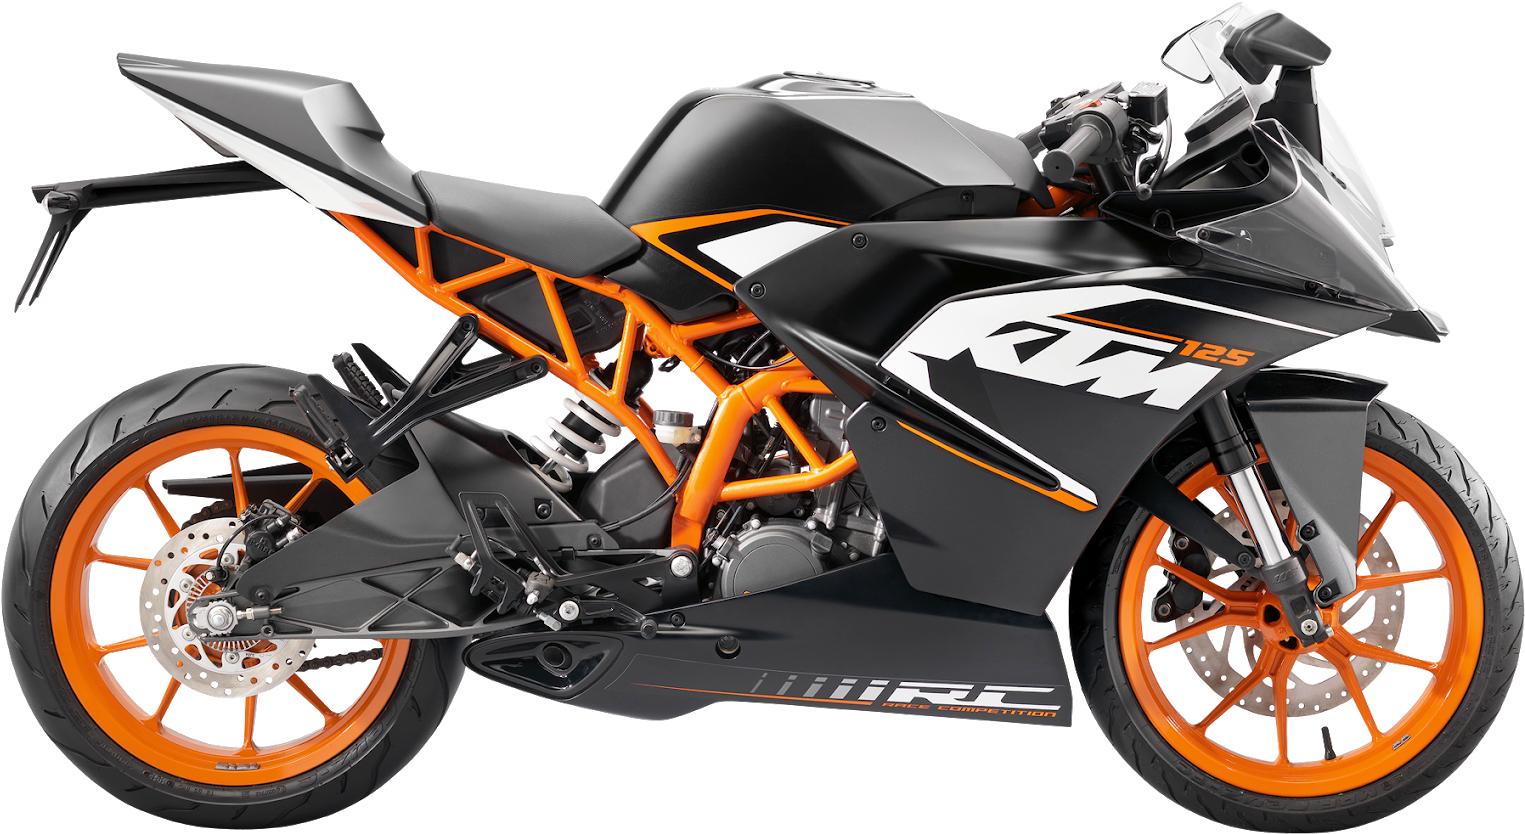 A Black And Orange Motorcycle